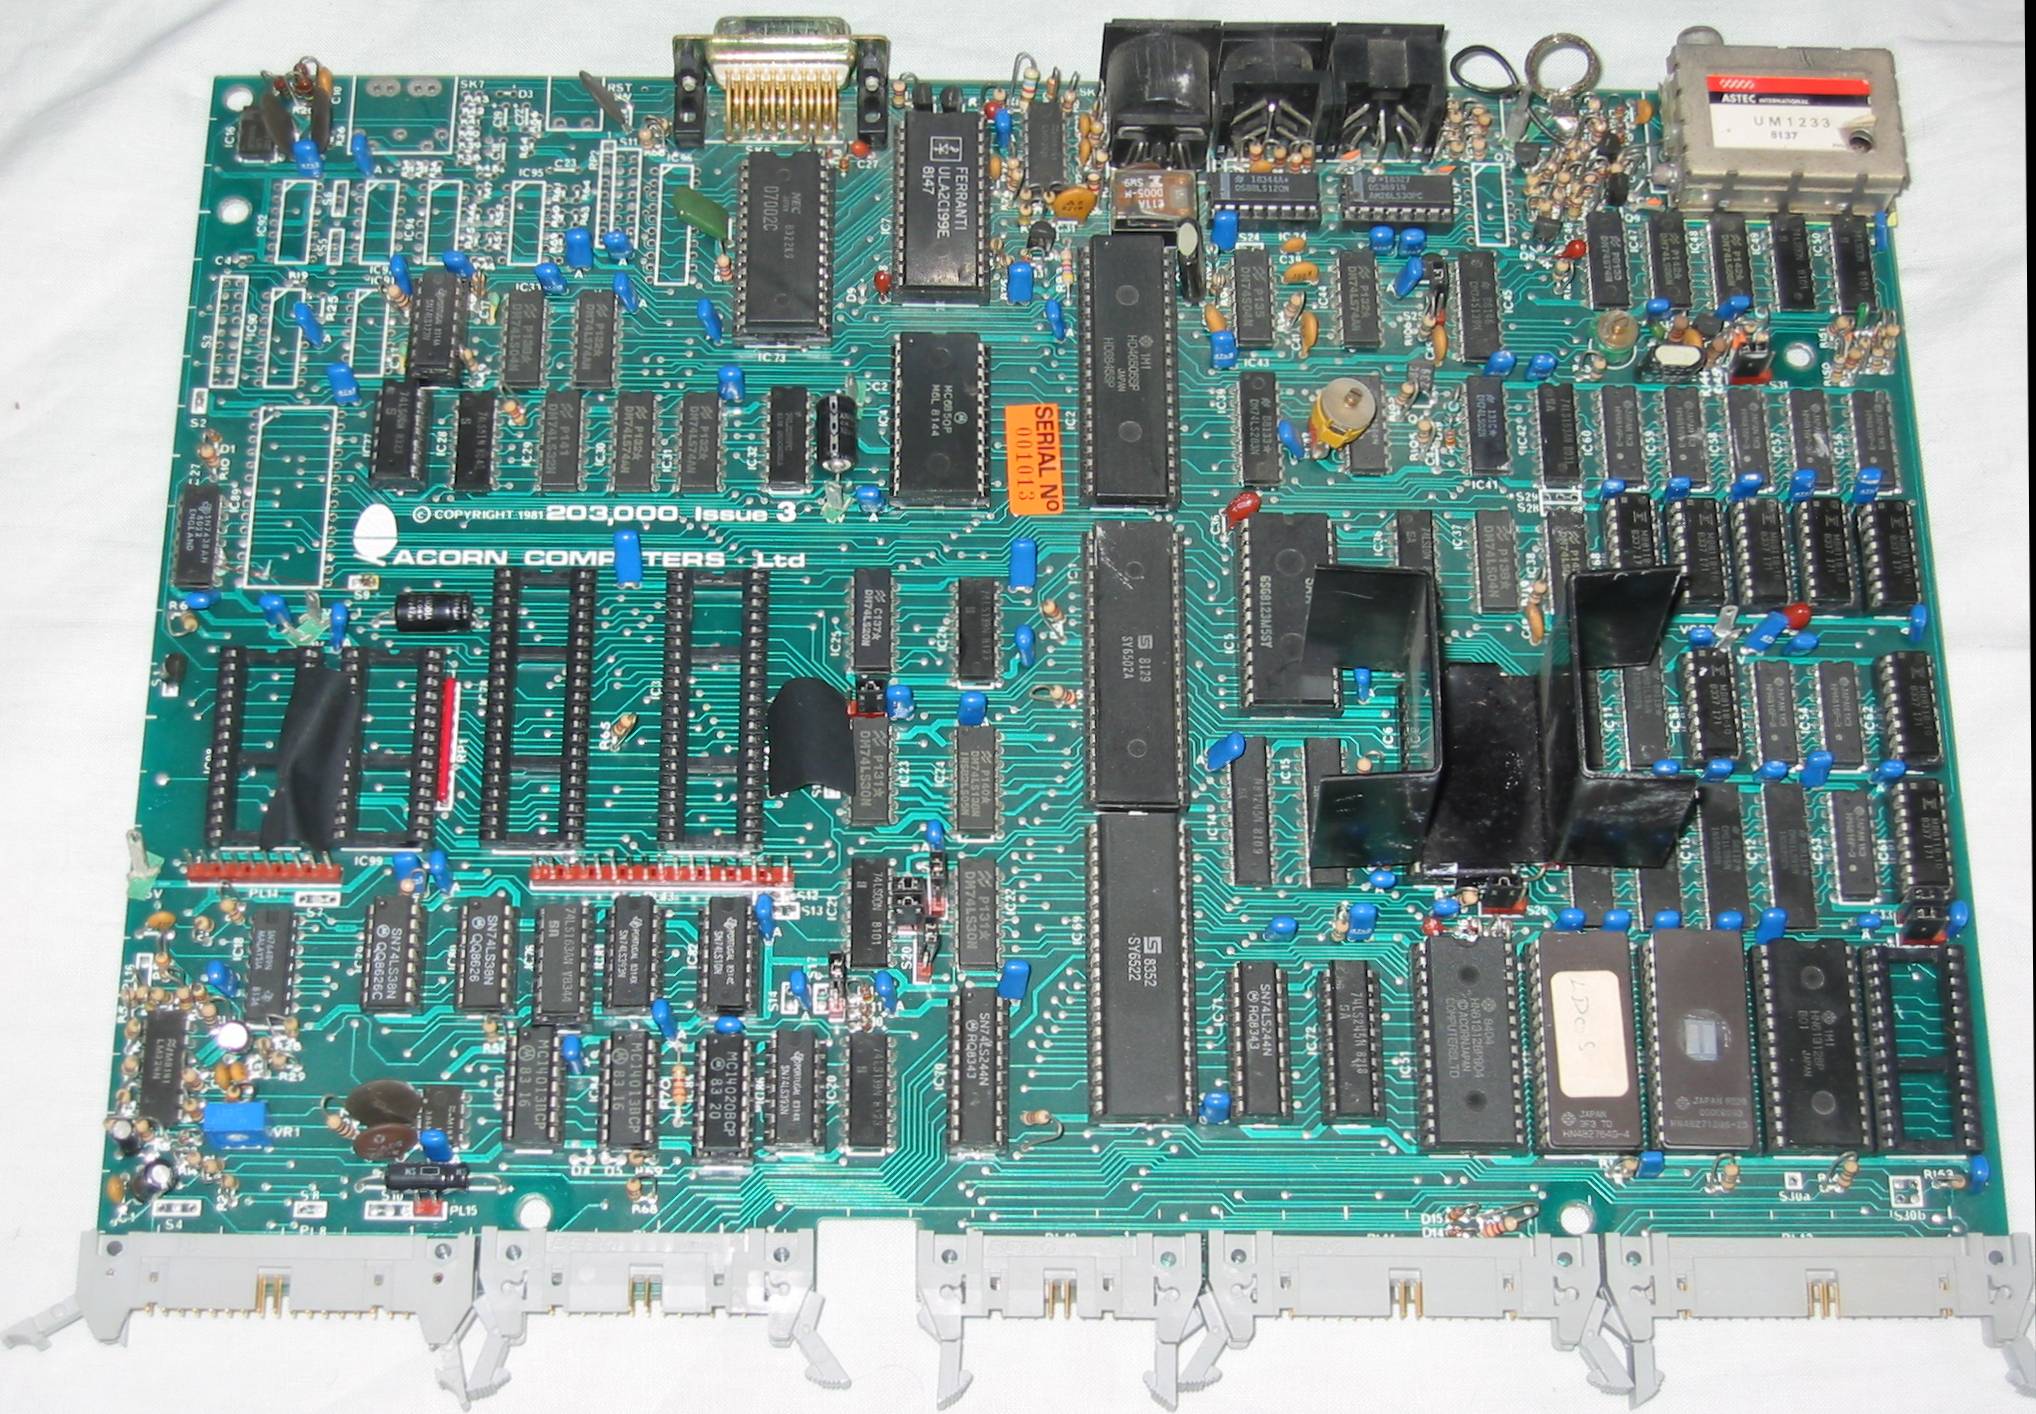 BBC Model A Issue 3 motherboard